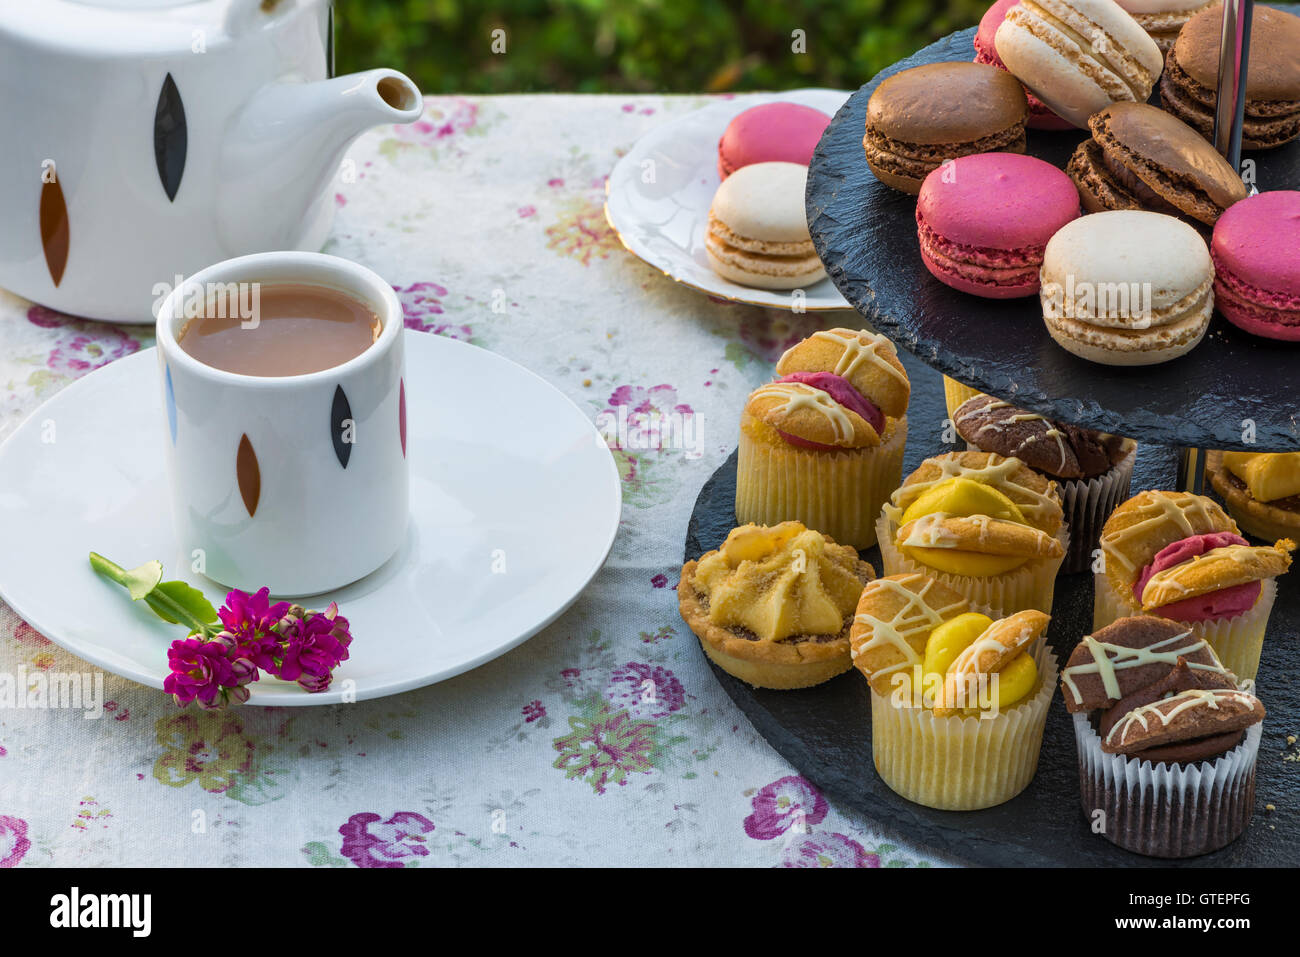 Tea with cakes and macaroons set up on the table in the garden Stock Photo